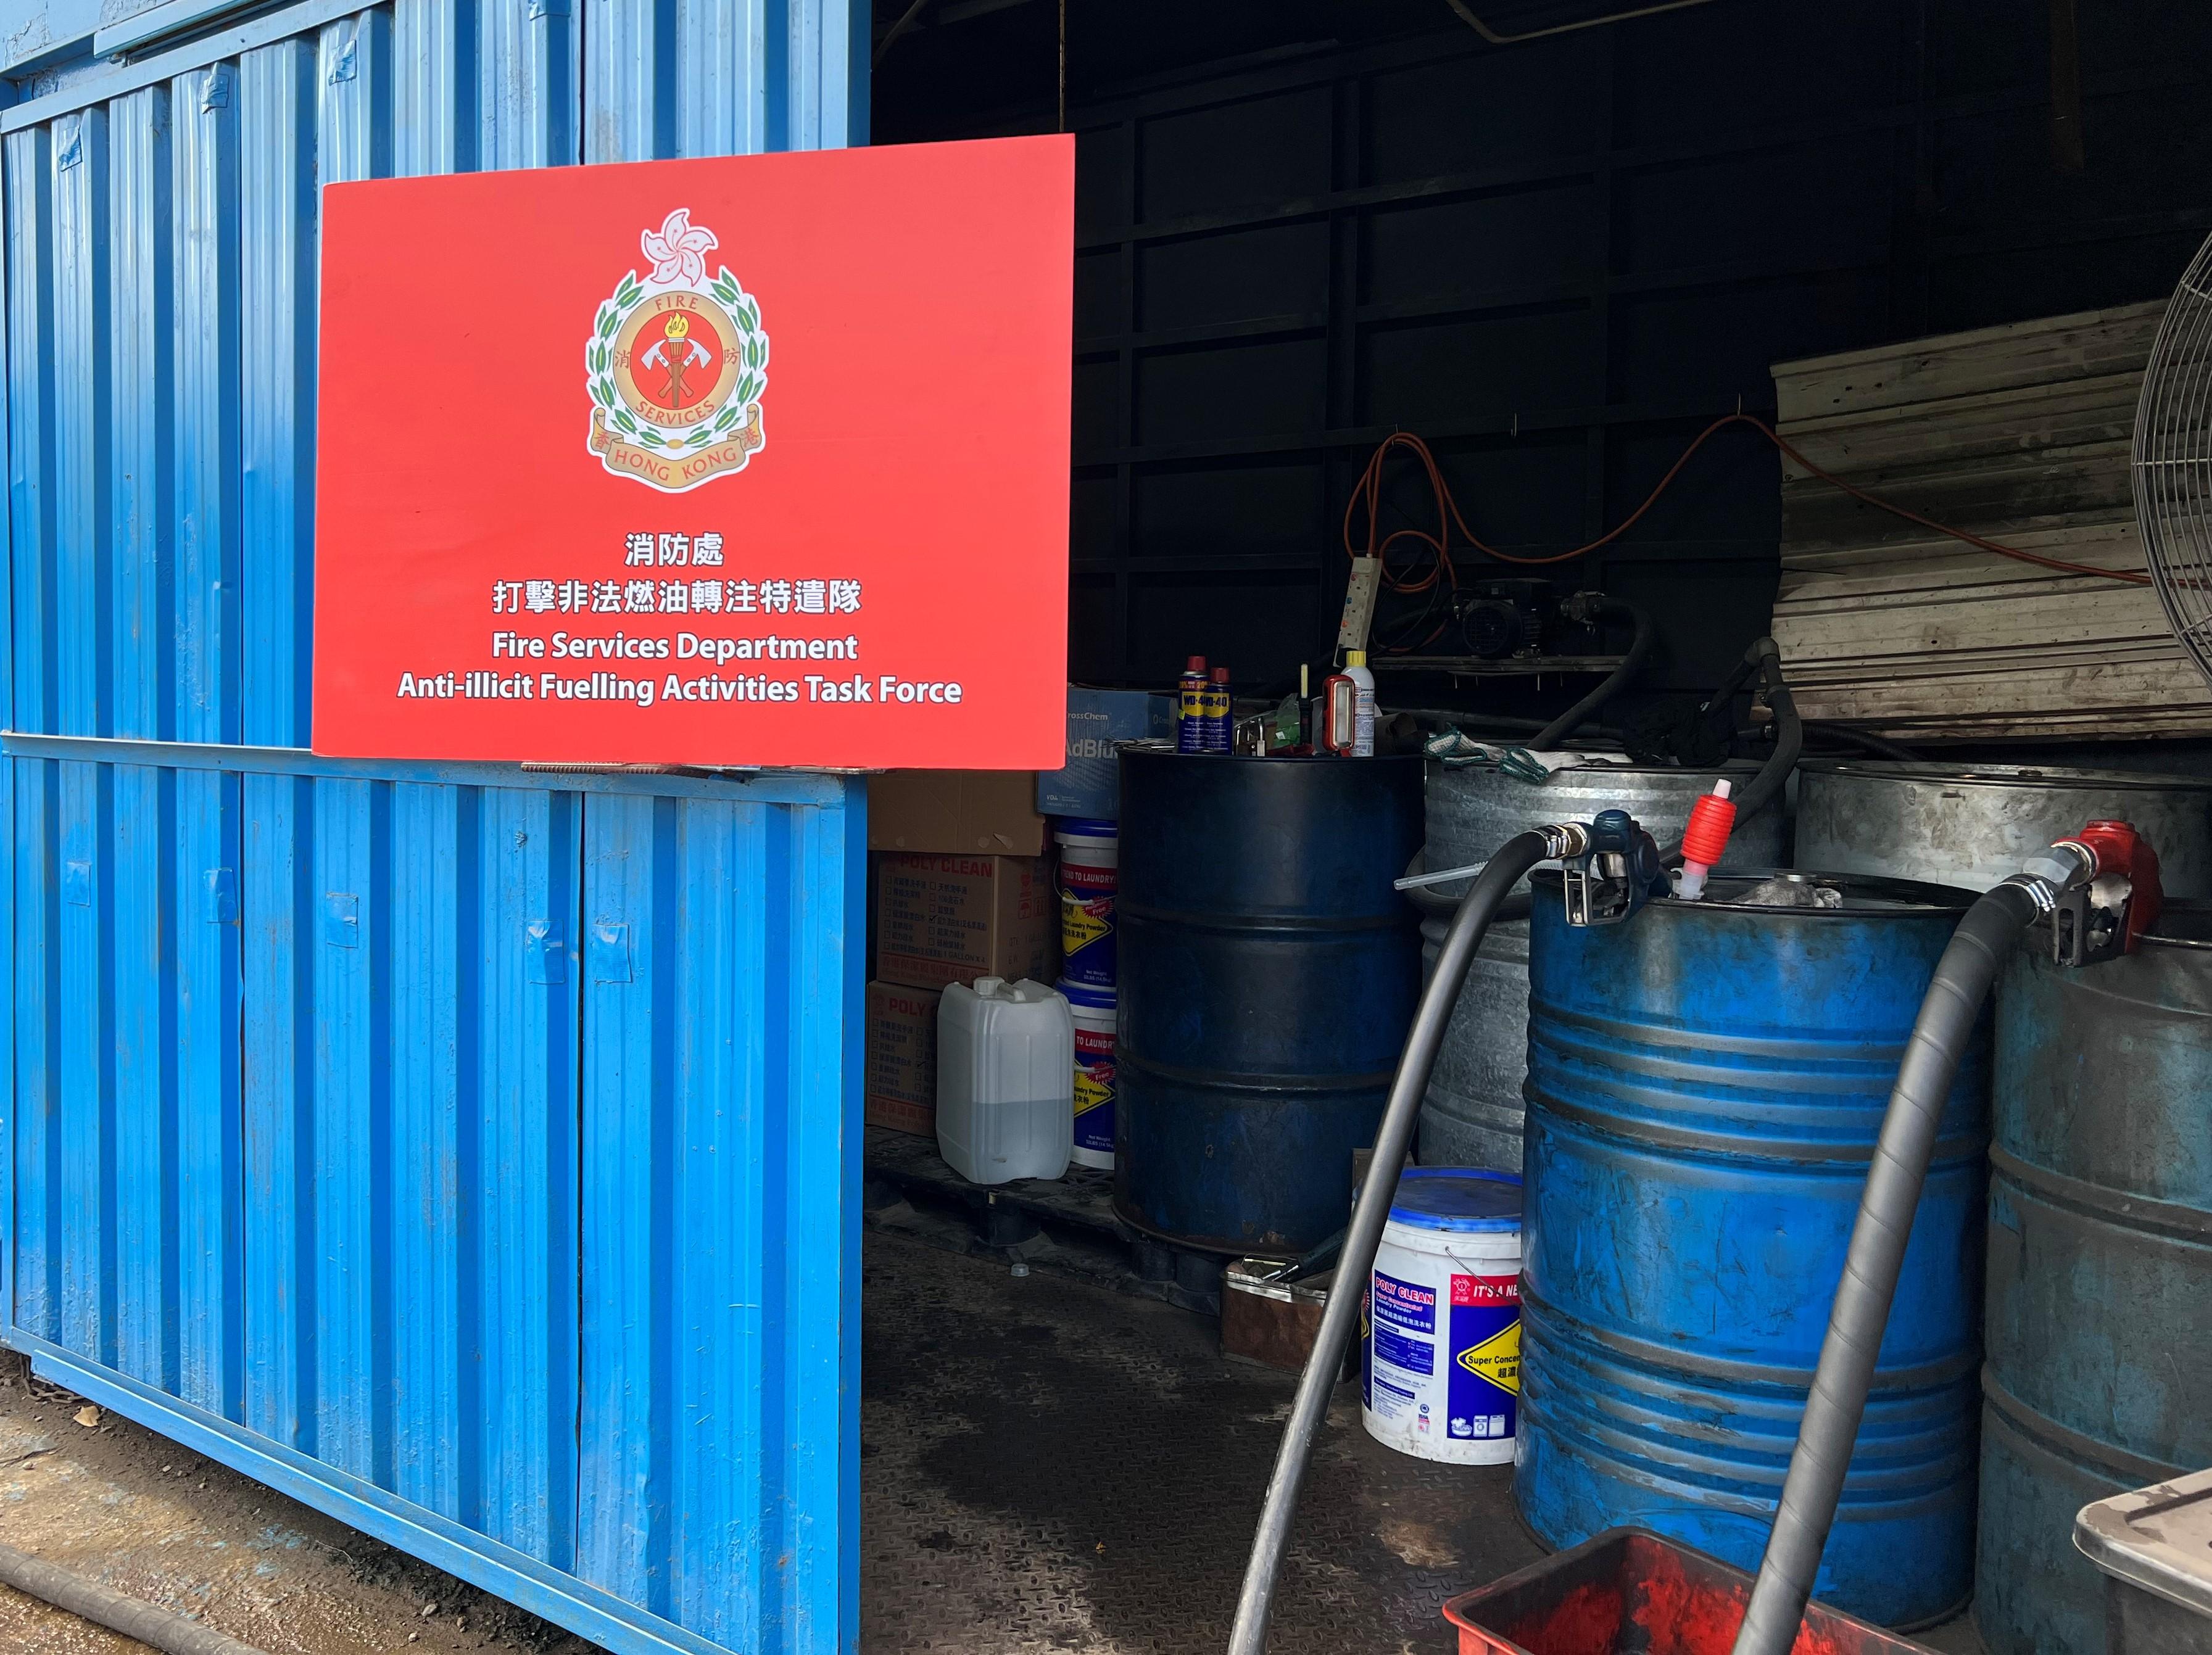 The Fire Services Department, the Hong Kong Police Force and Hong Kong Customs mounted a joint operation codenamed "Winter Thunder" to combat illicit fuelling activities today (January 26). Photo shows metal drums and fuelling facilities at a suspected illegal fuelling station.